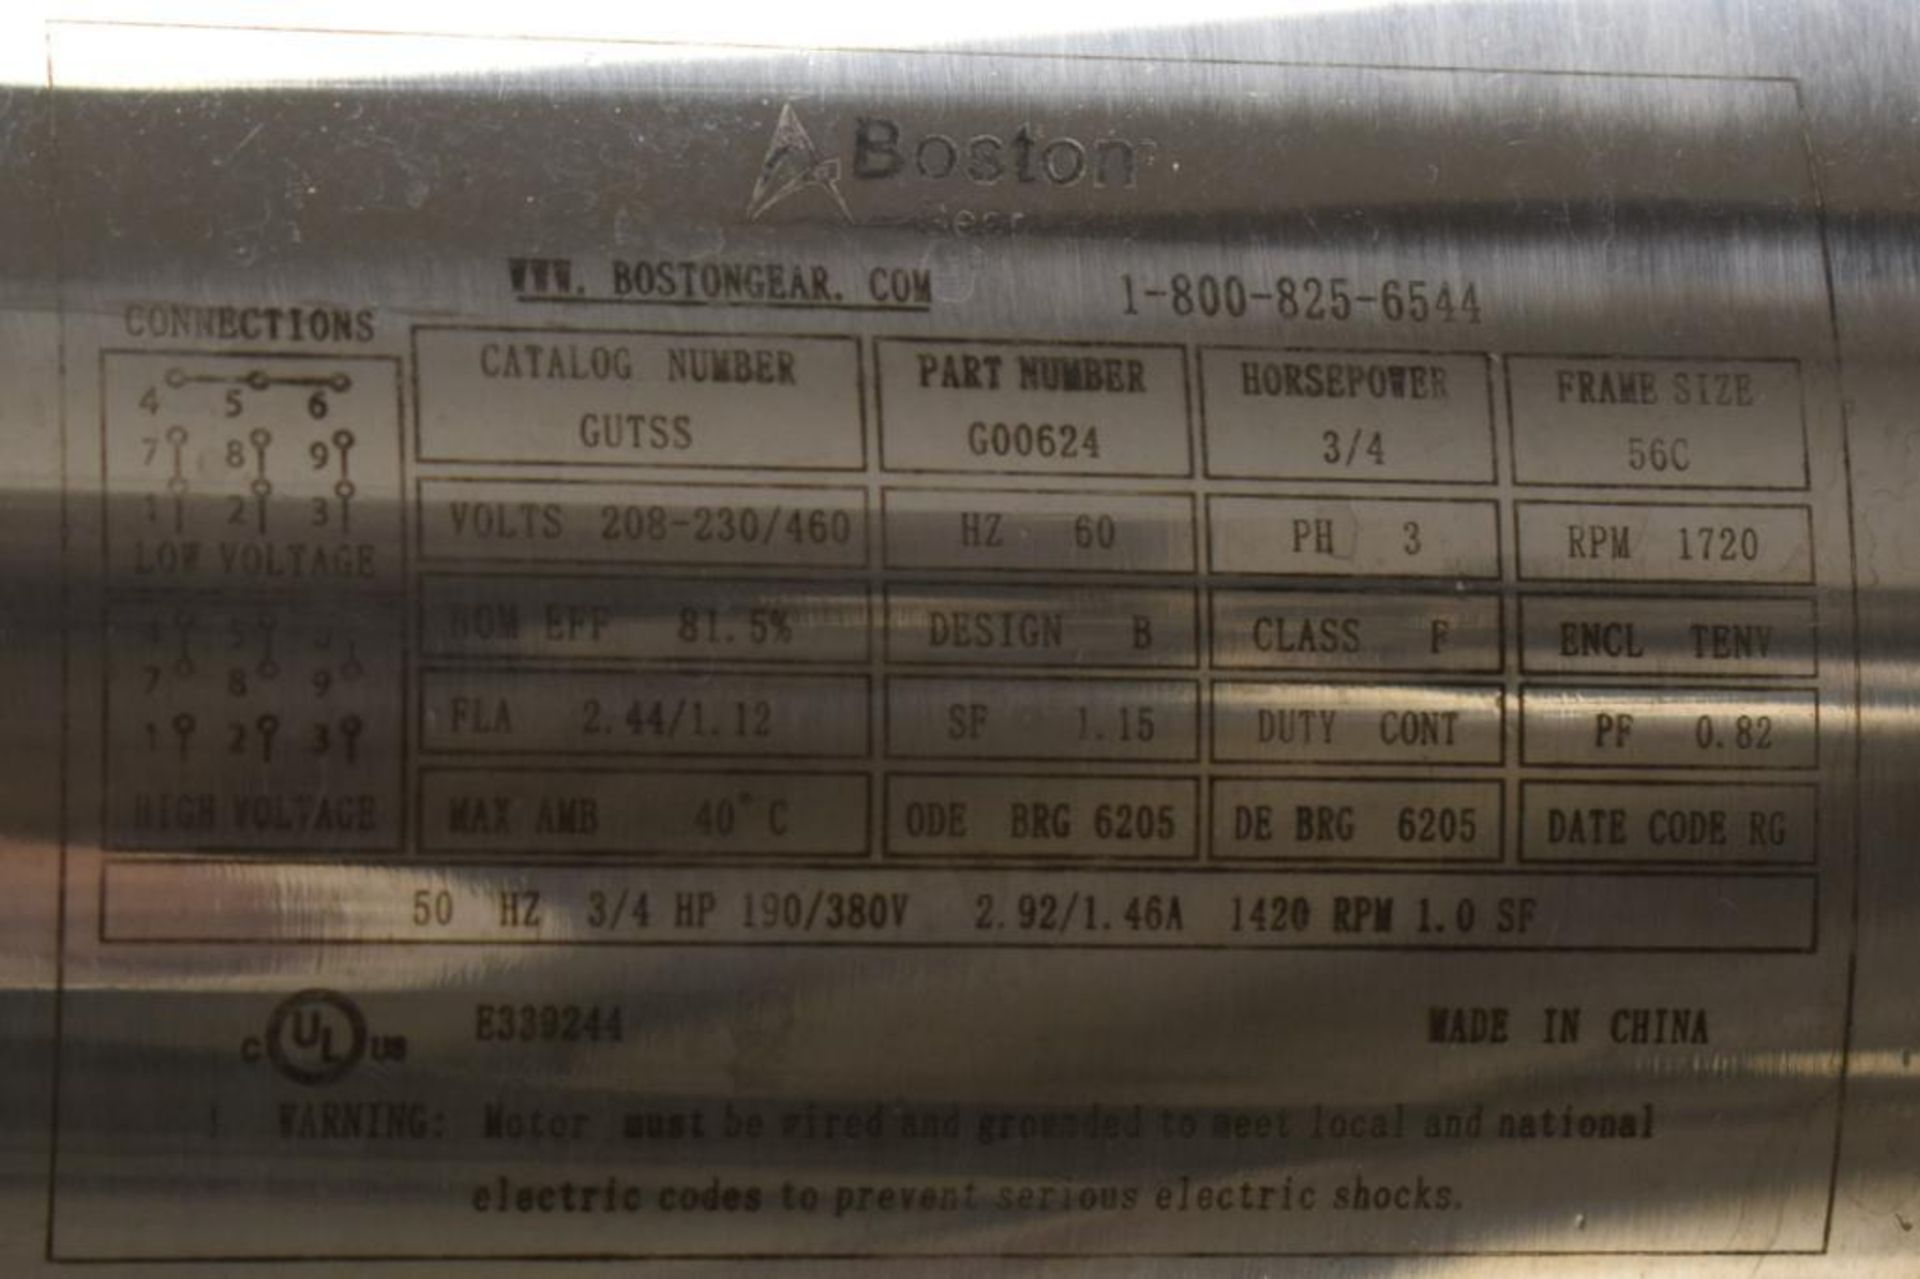 Feldmeier Pressure Tank, Approximate 350 Liter (92 Gallon), 316L Stainless Steel. Approximate 30" di - Image 9 of 13